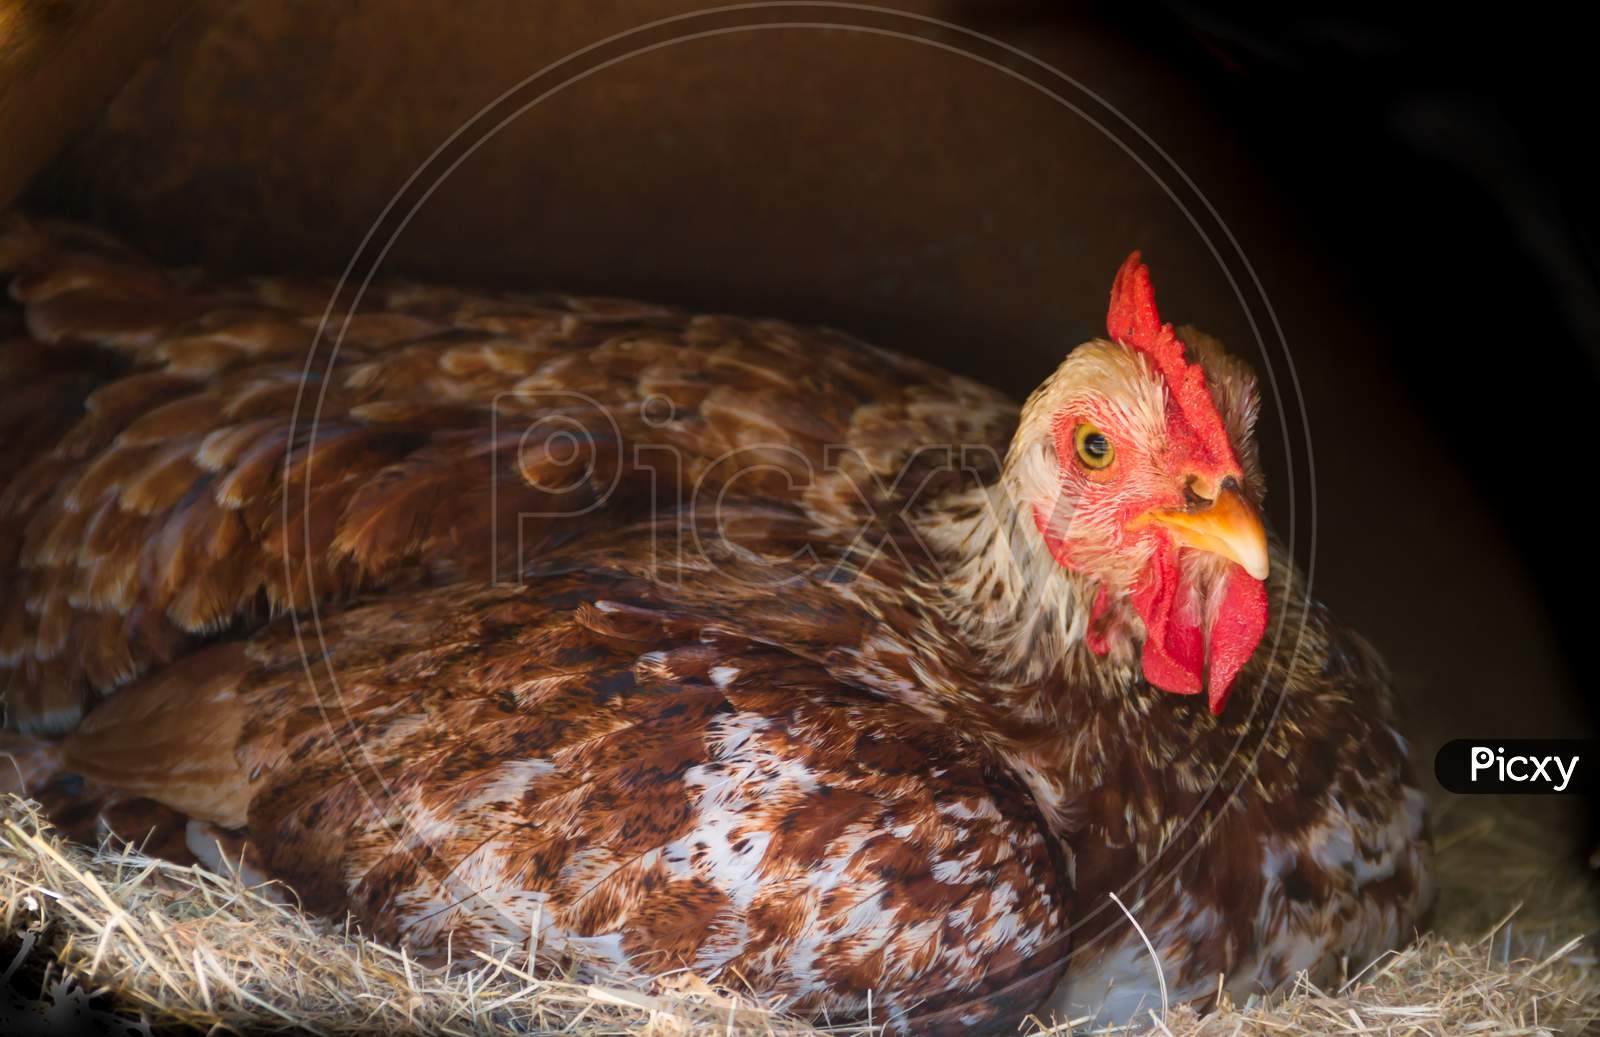 Broody Hen Brooding In The Nest Of The Farm